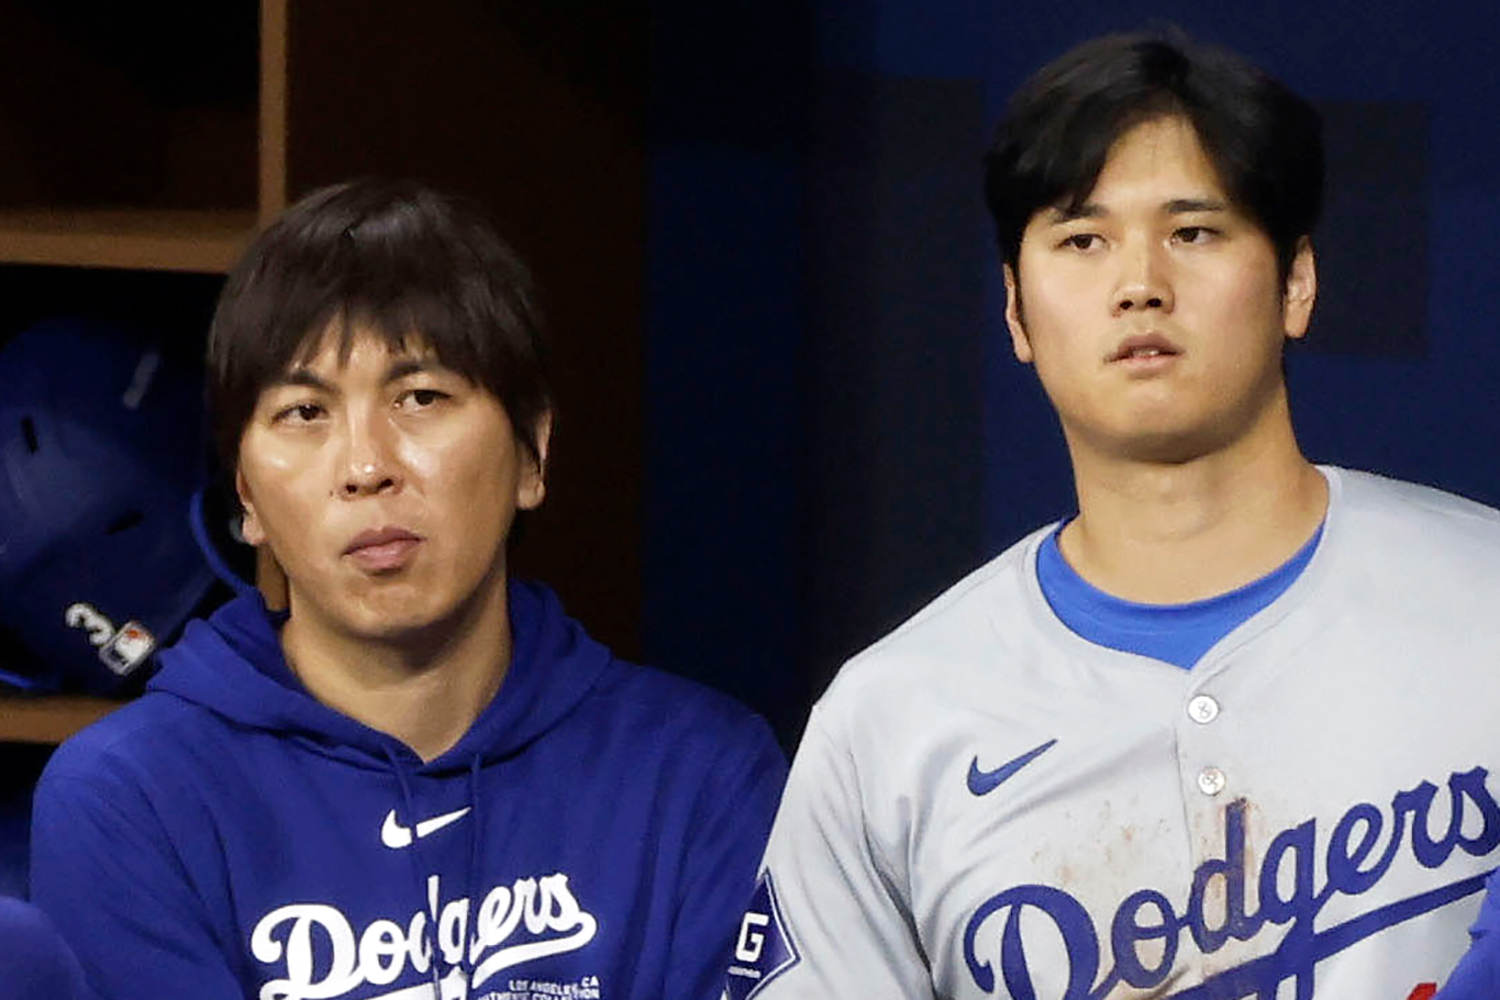 Shohei Ohtani's former interpreter accused of stealing $16M from the MLB star